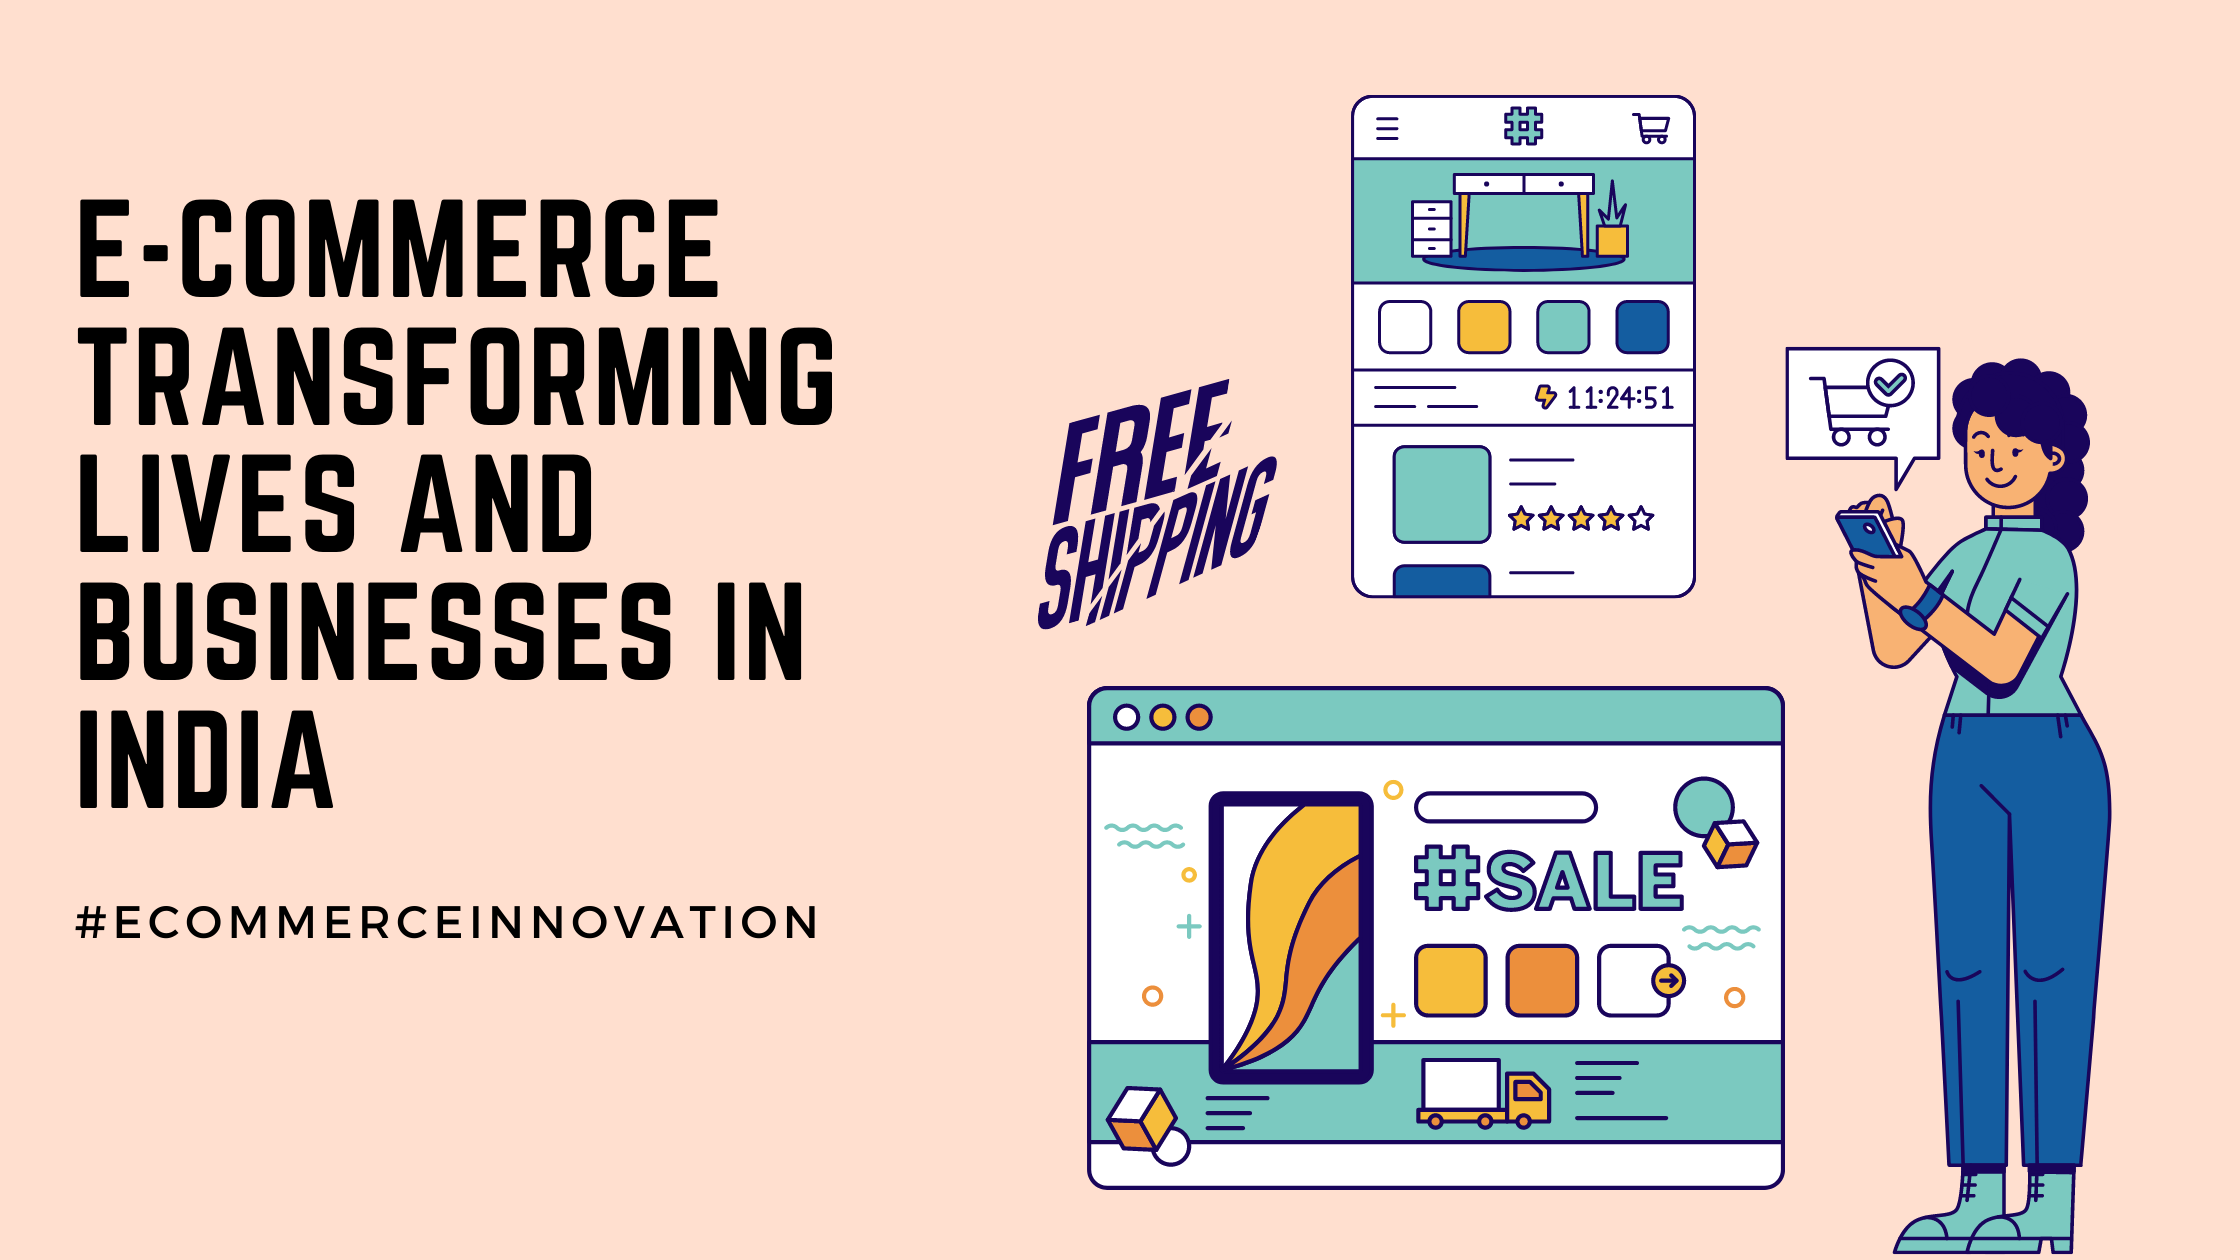 E-Commerce transforming lives and businesses in India #ECommerceInnovation